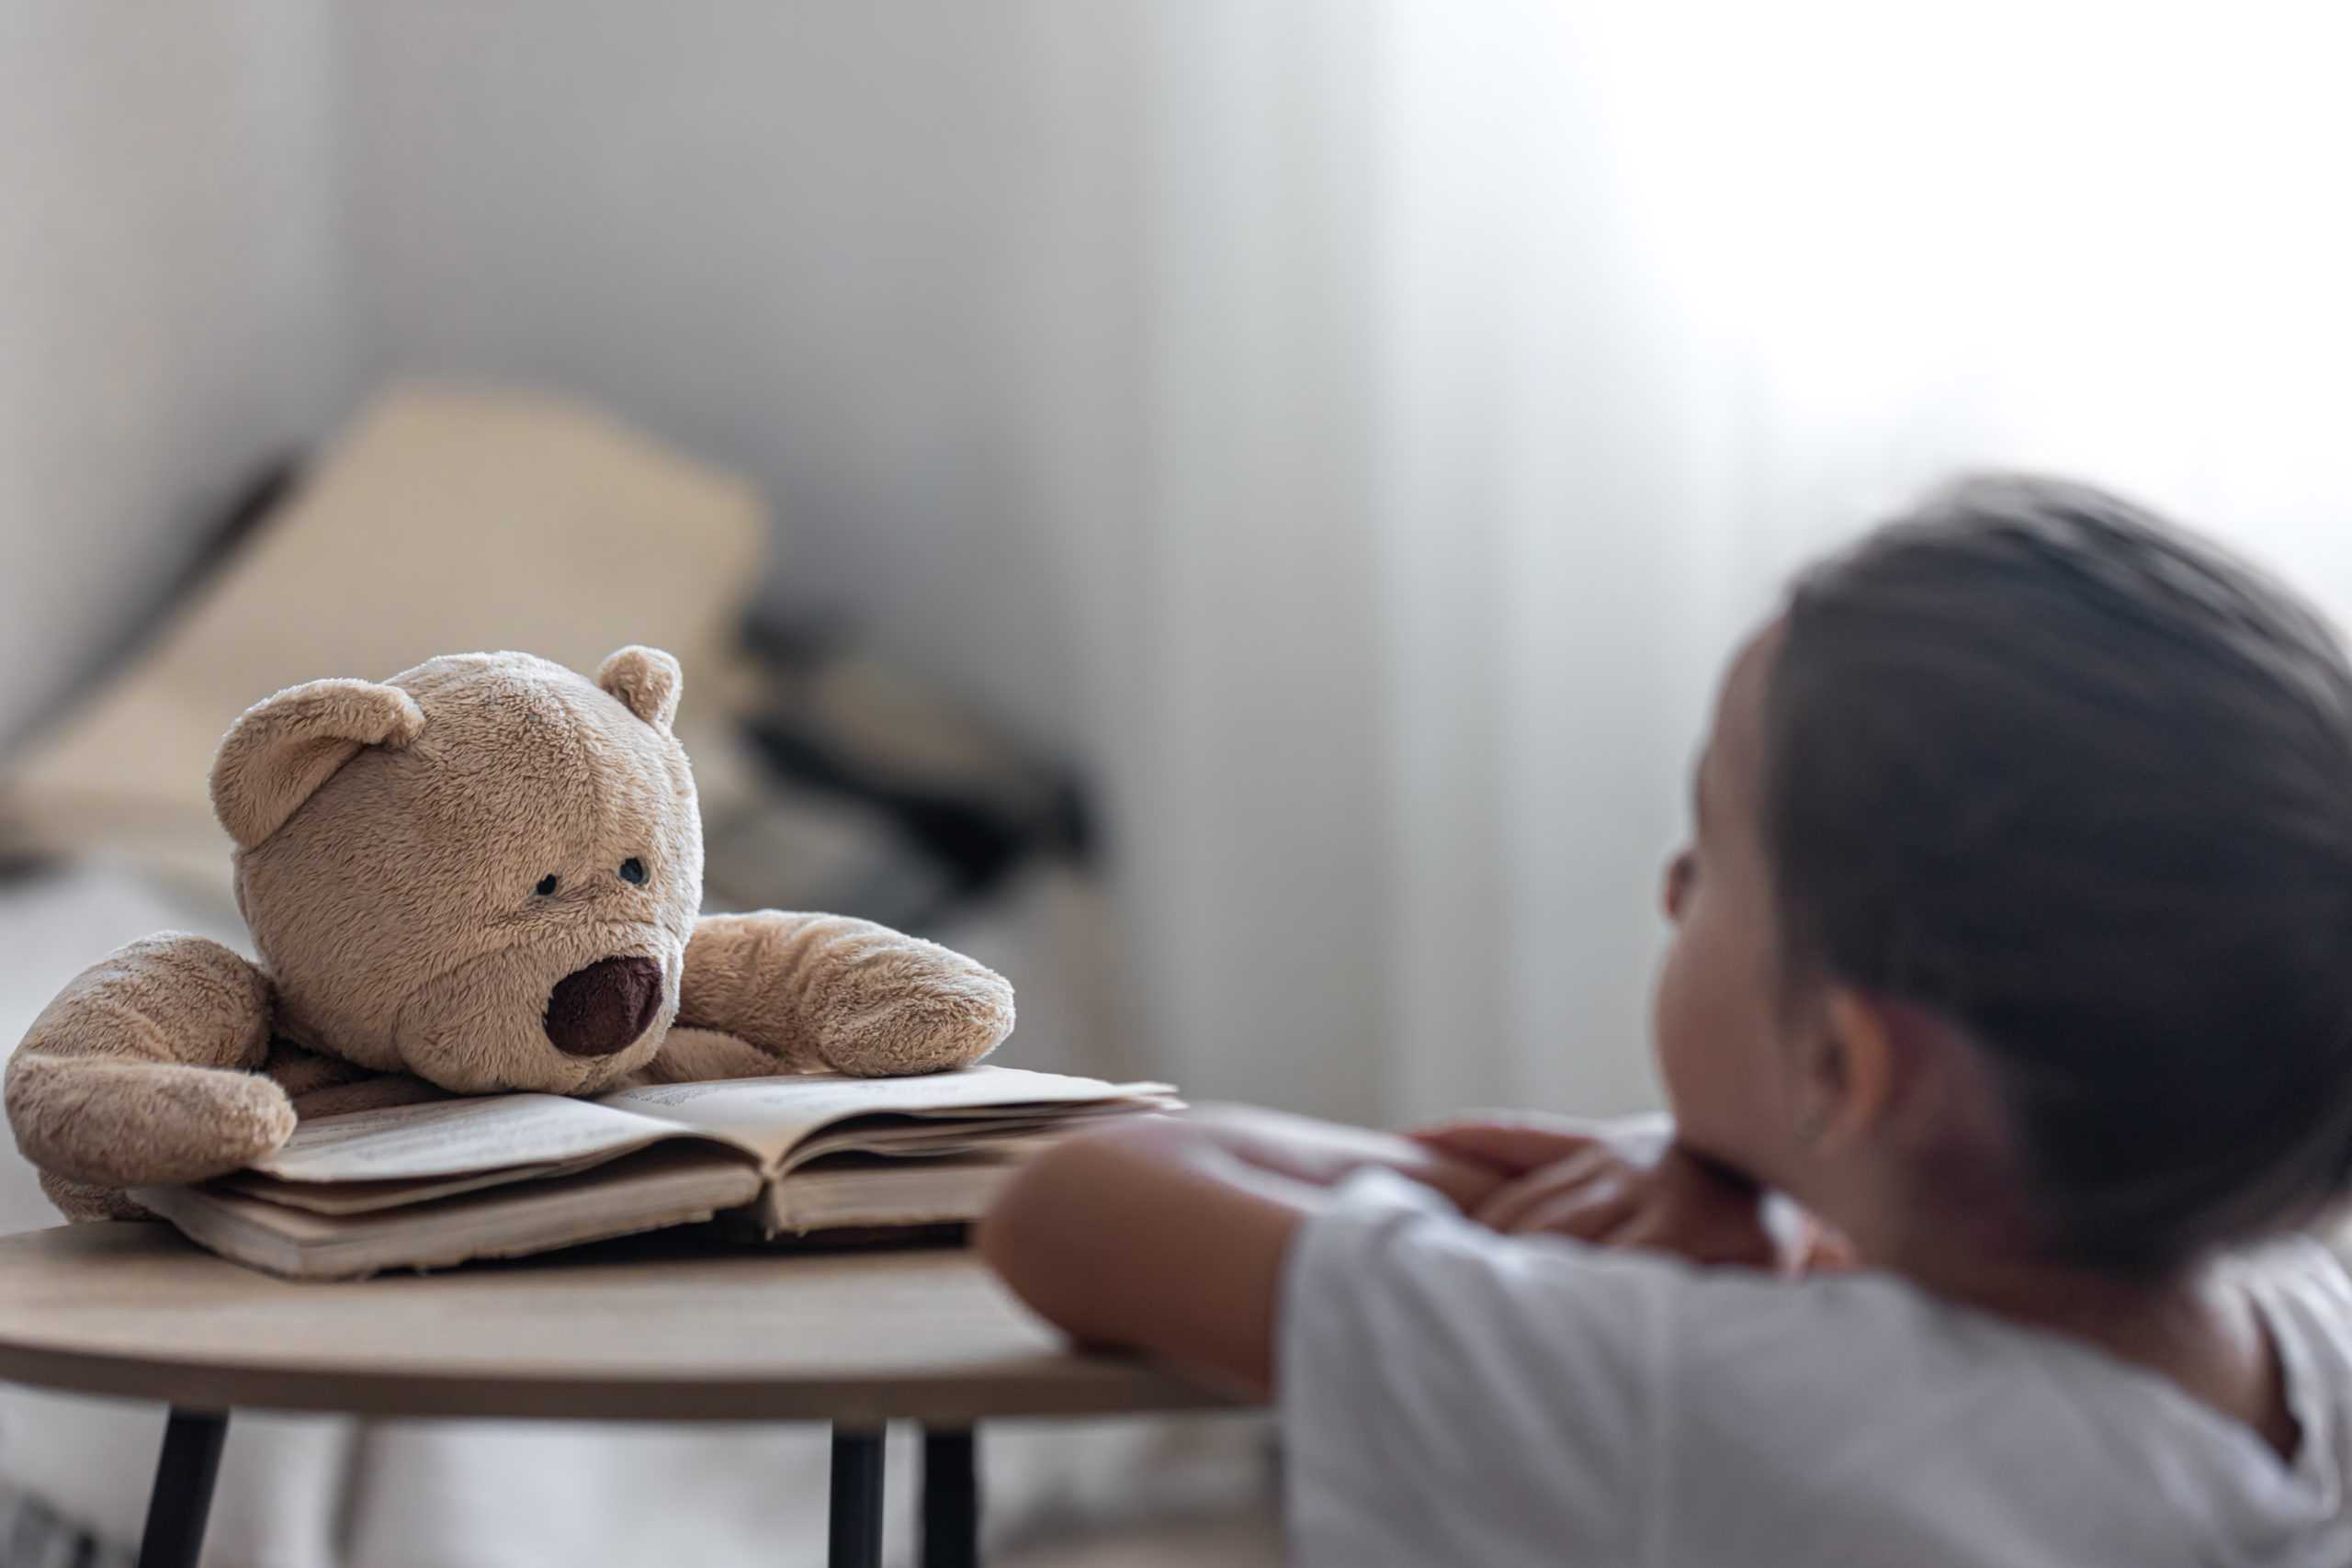 a-little-girl-plays-with-her-teddy-bear-and-a-book-teaches-him-to-read-plays-at-school-scaled